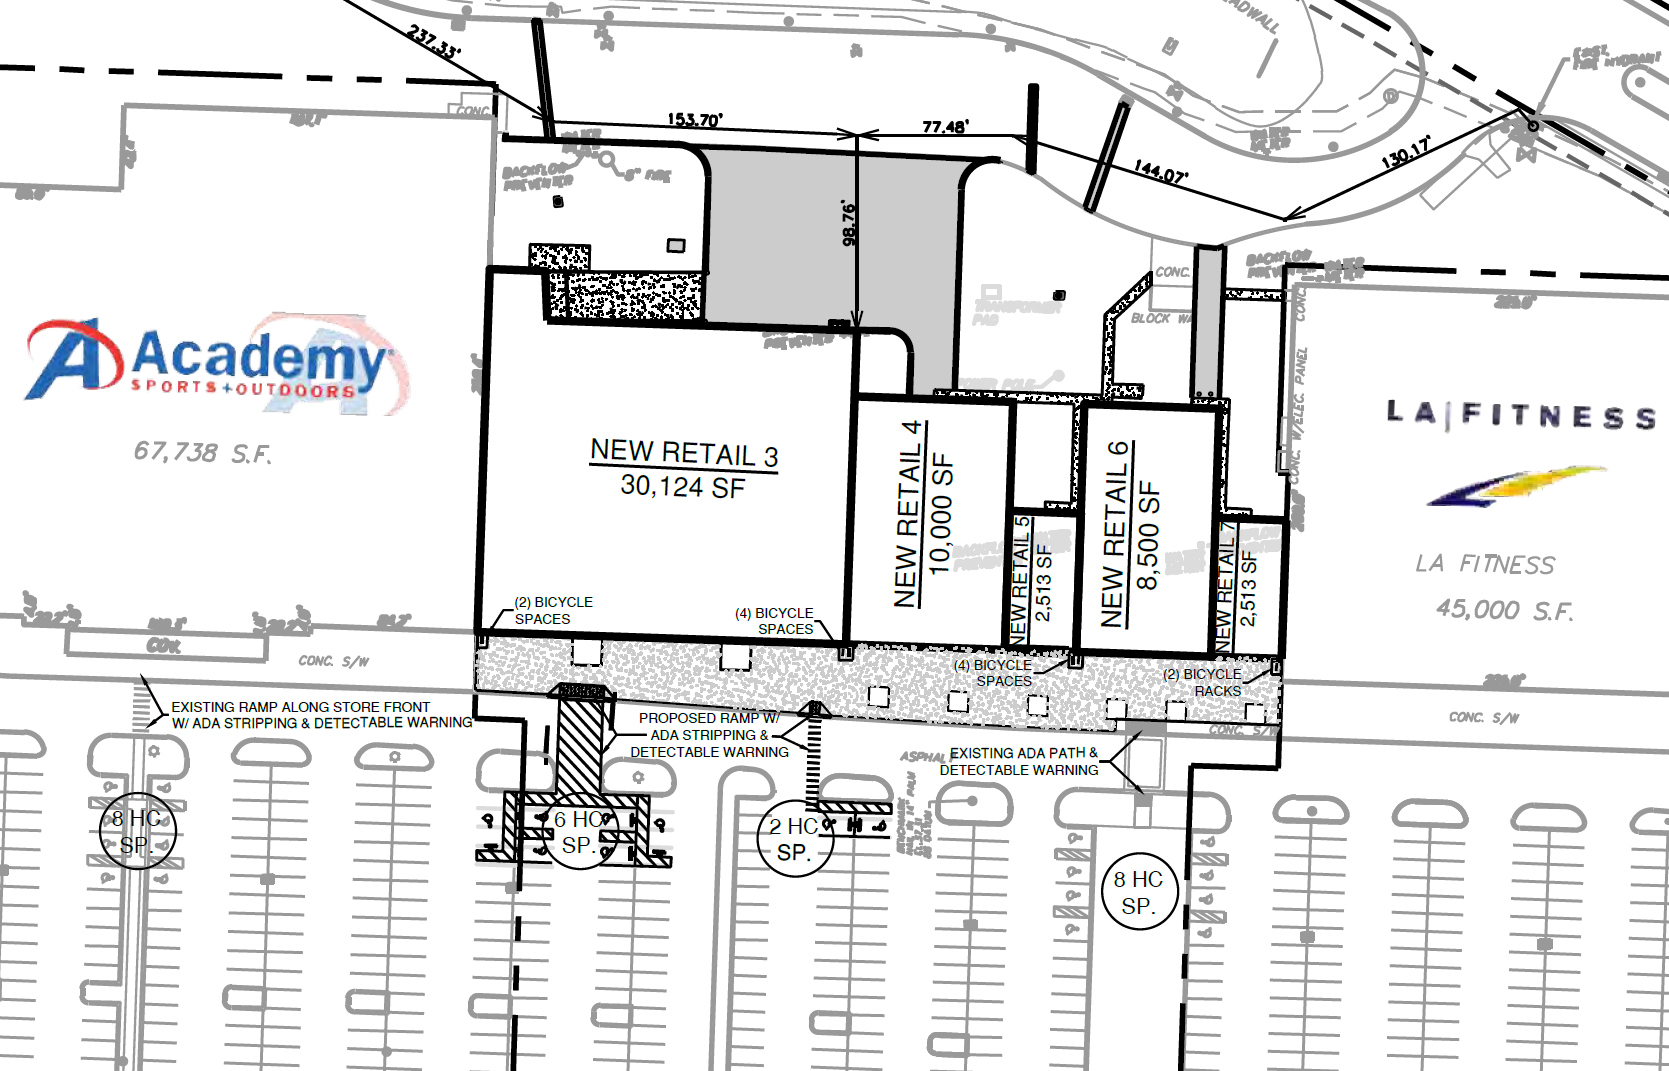 Several new shops are planned between Academy Sports and LA Fitness.